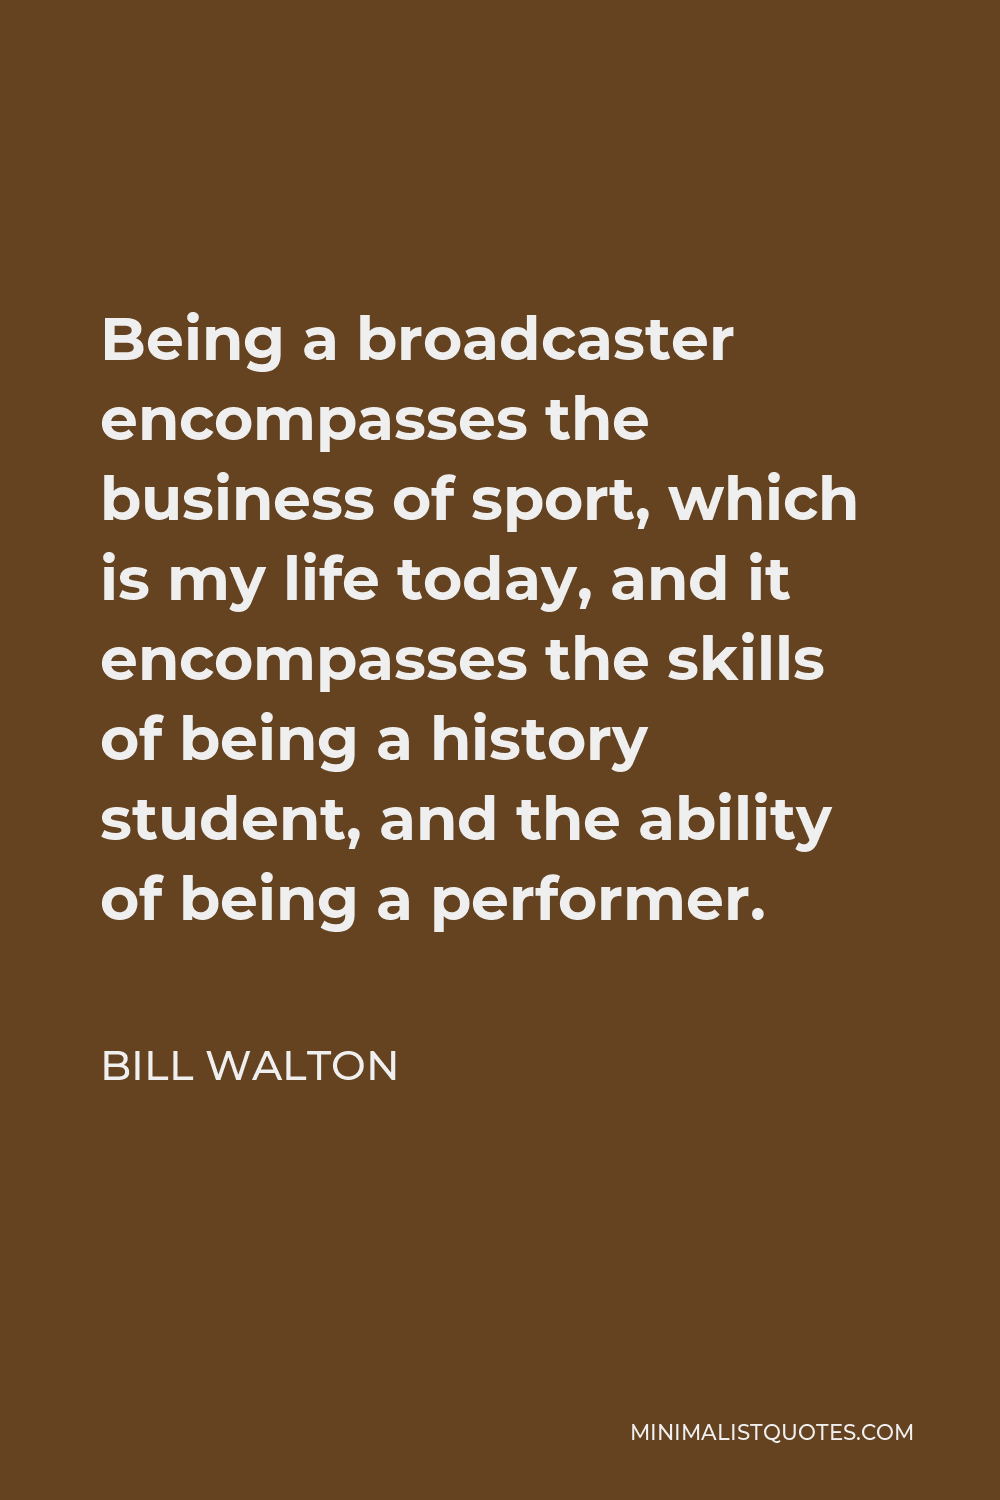 Bill Walton Quote - Being a broadcaster encompasses the business of sport, which is my life today, and it encompasses the skills of being a history student, and the ability of being a performer.